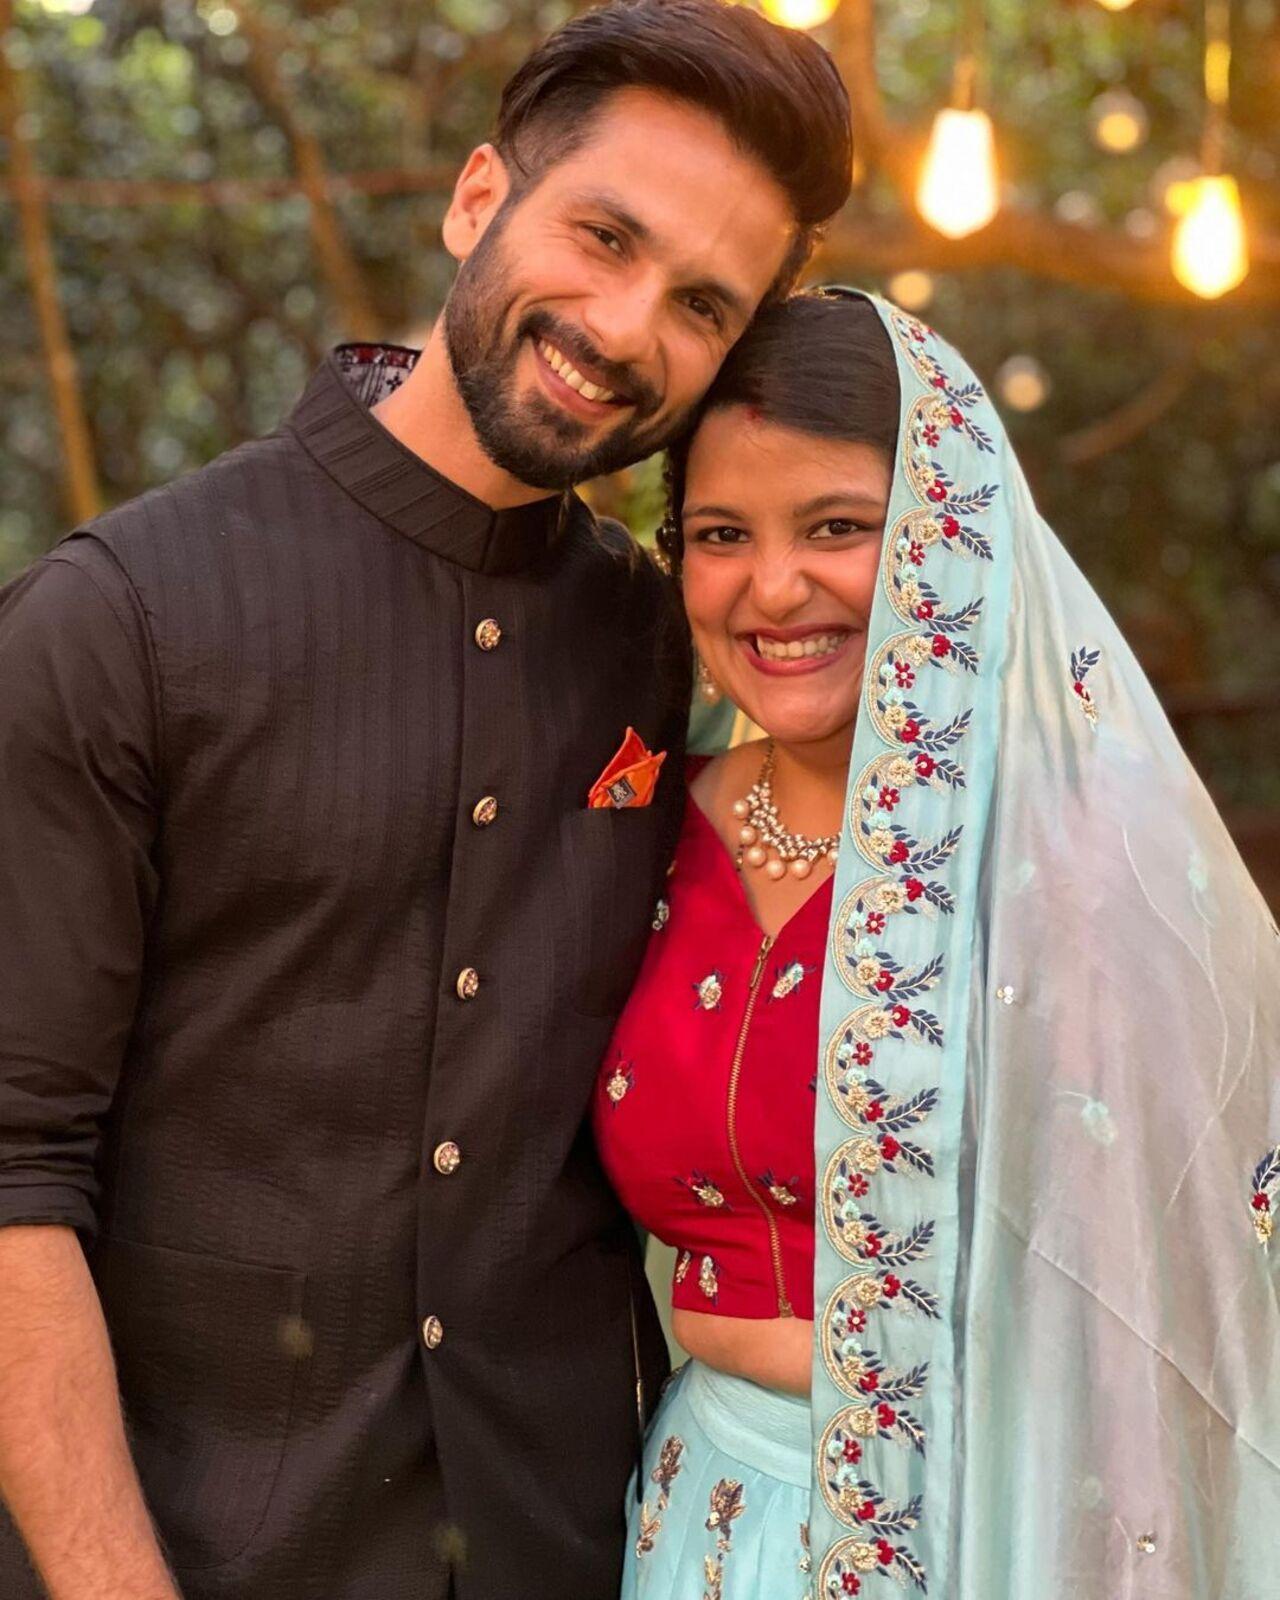 For Sanah Kapur, Shahid Kapoor was the perfect big brother who participated in her wedding rituals wholeheartedly